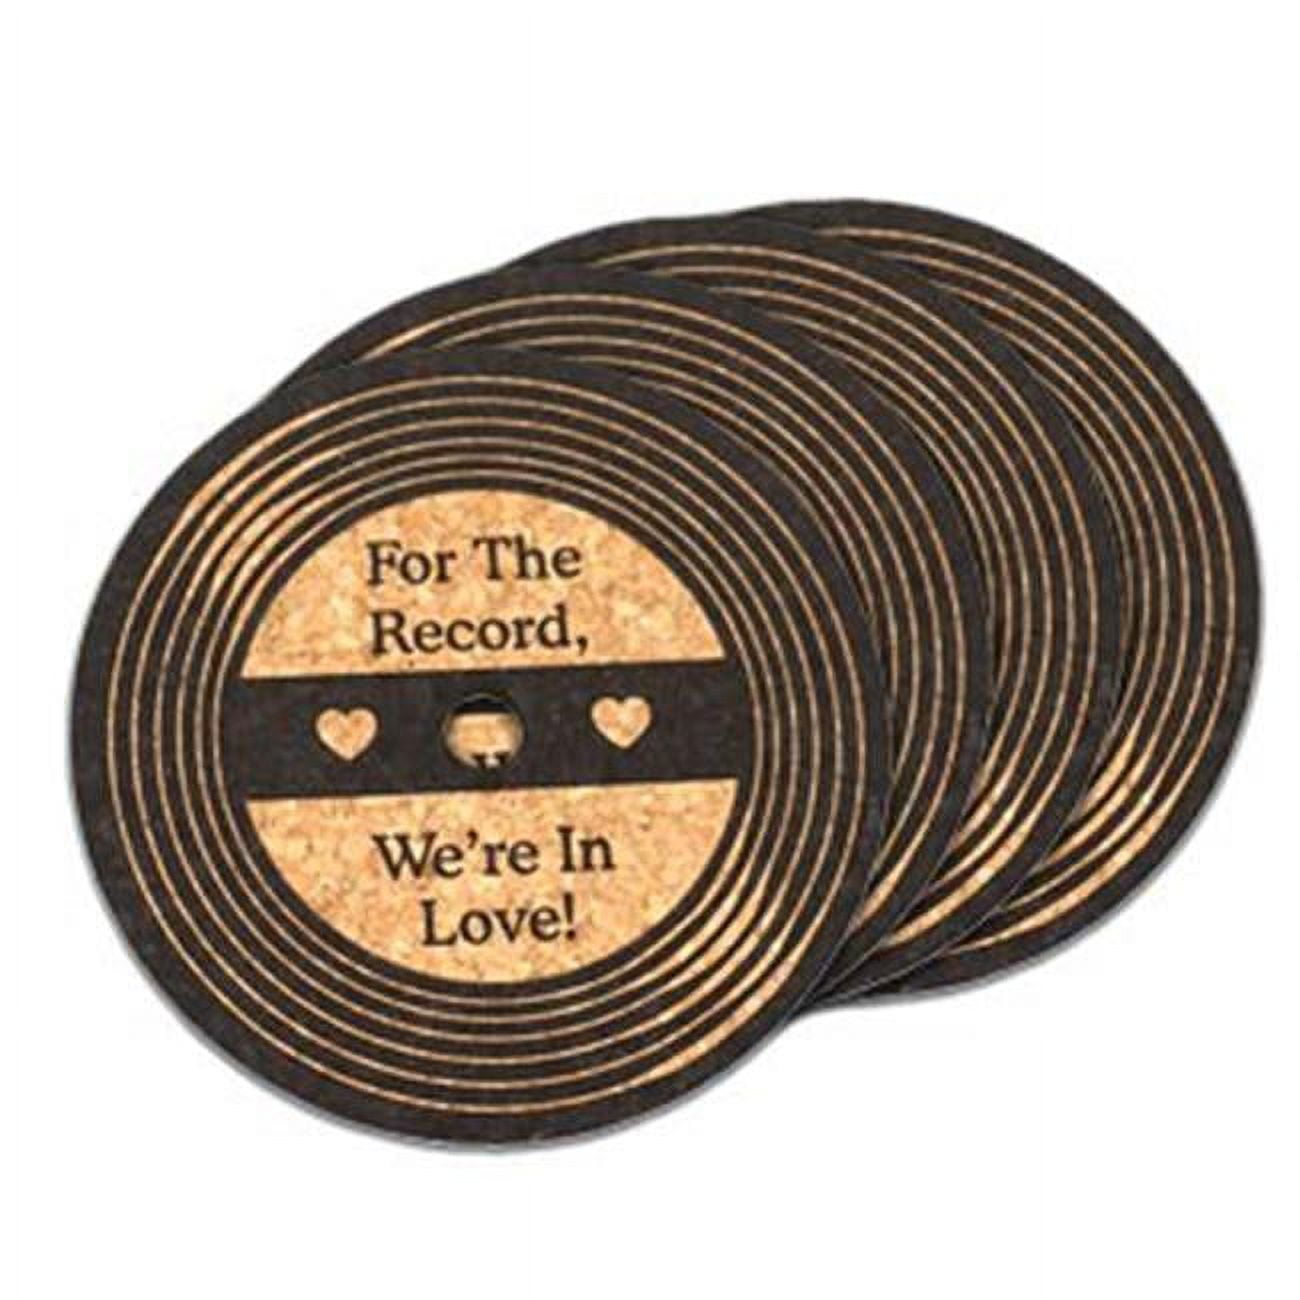 Picture of Ducky Days 8497189 4 in. Dia. For the Record We are in Love Vinyl Record Cork Coaster Wedding Favors - Set of 4